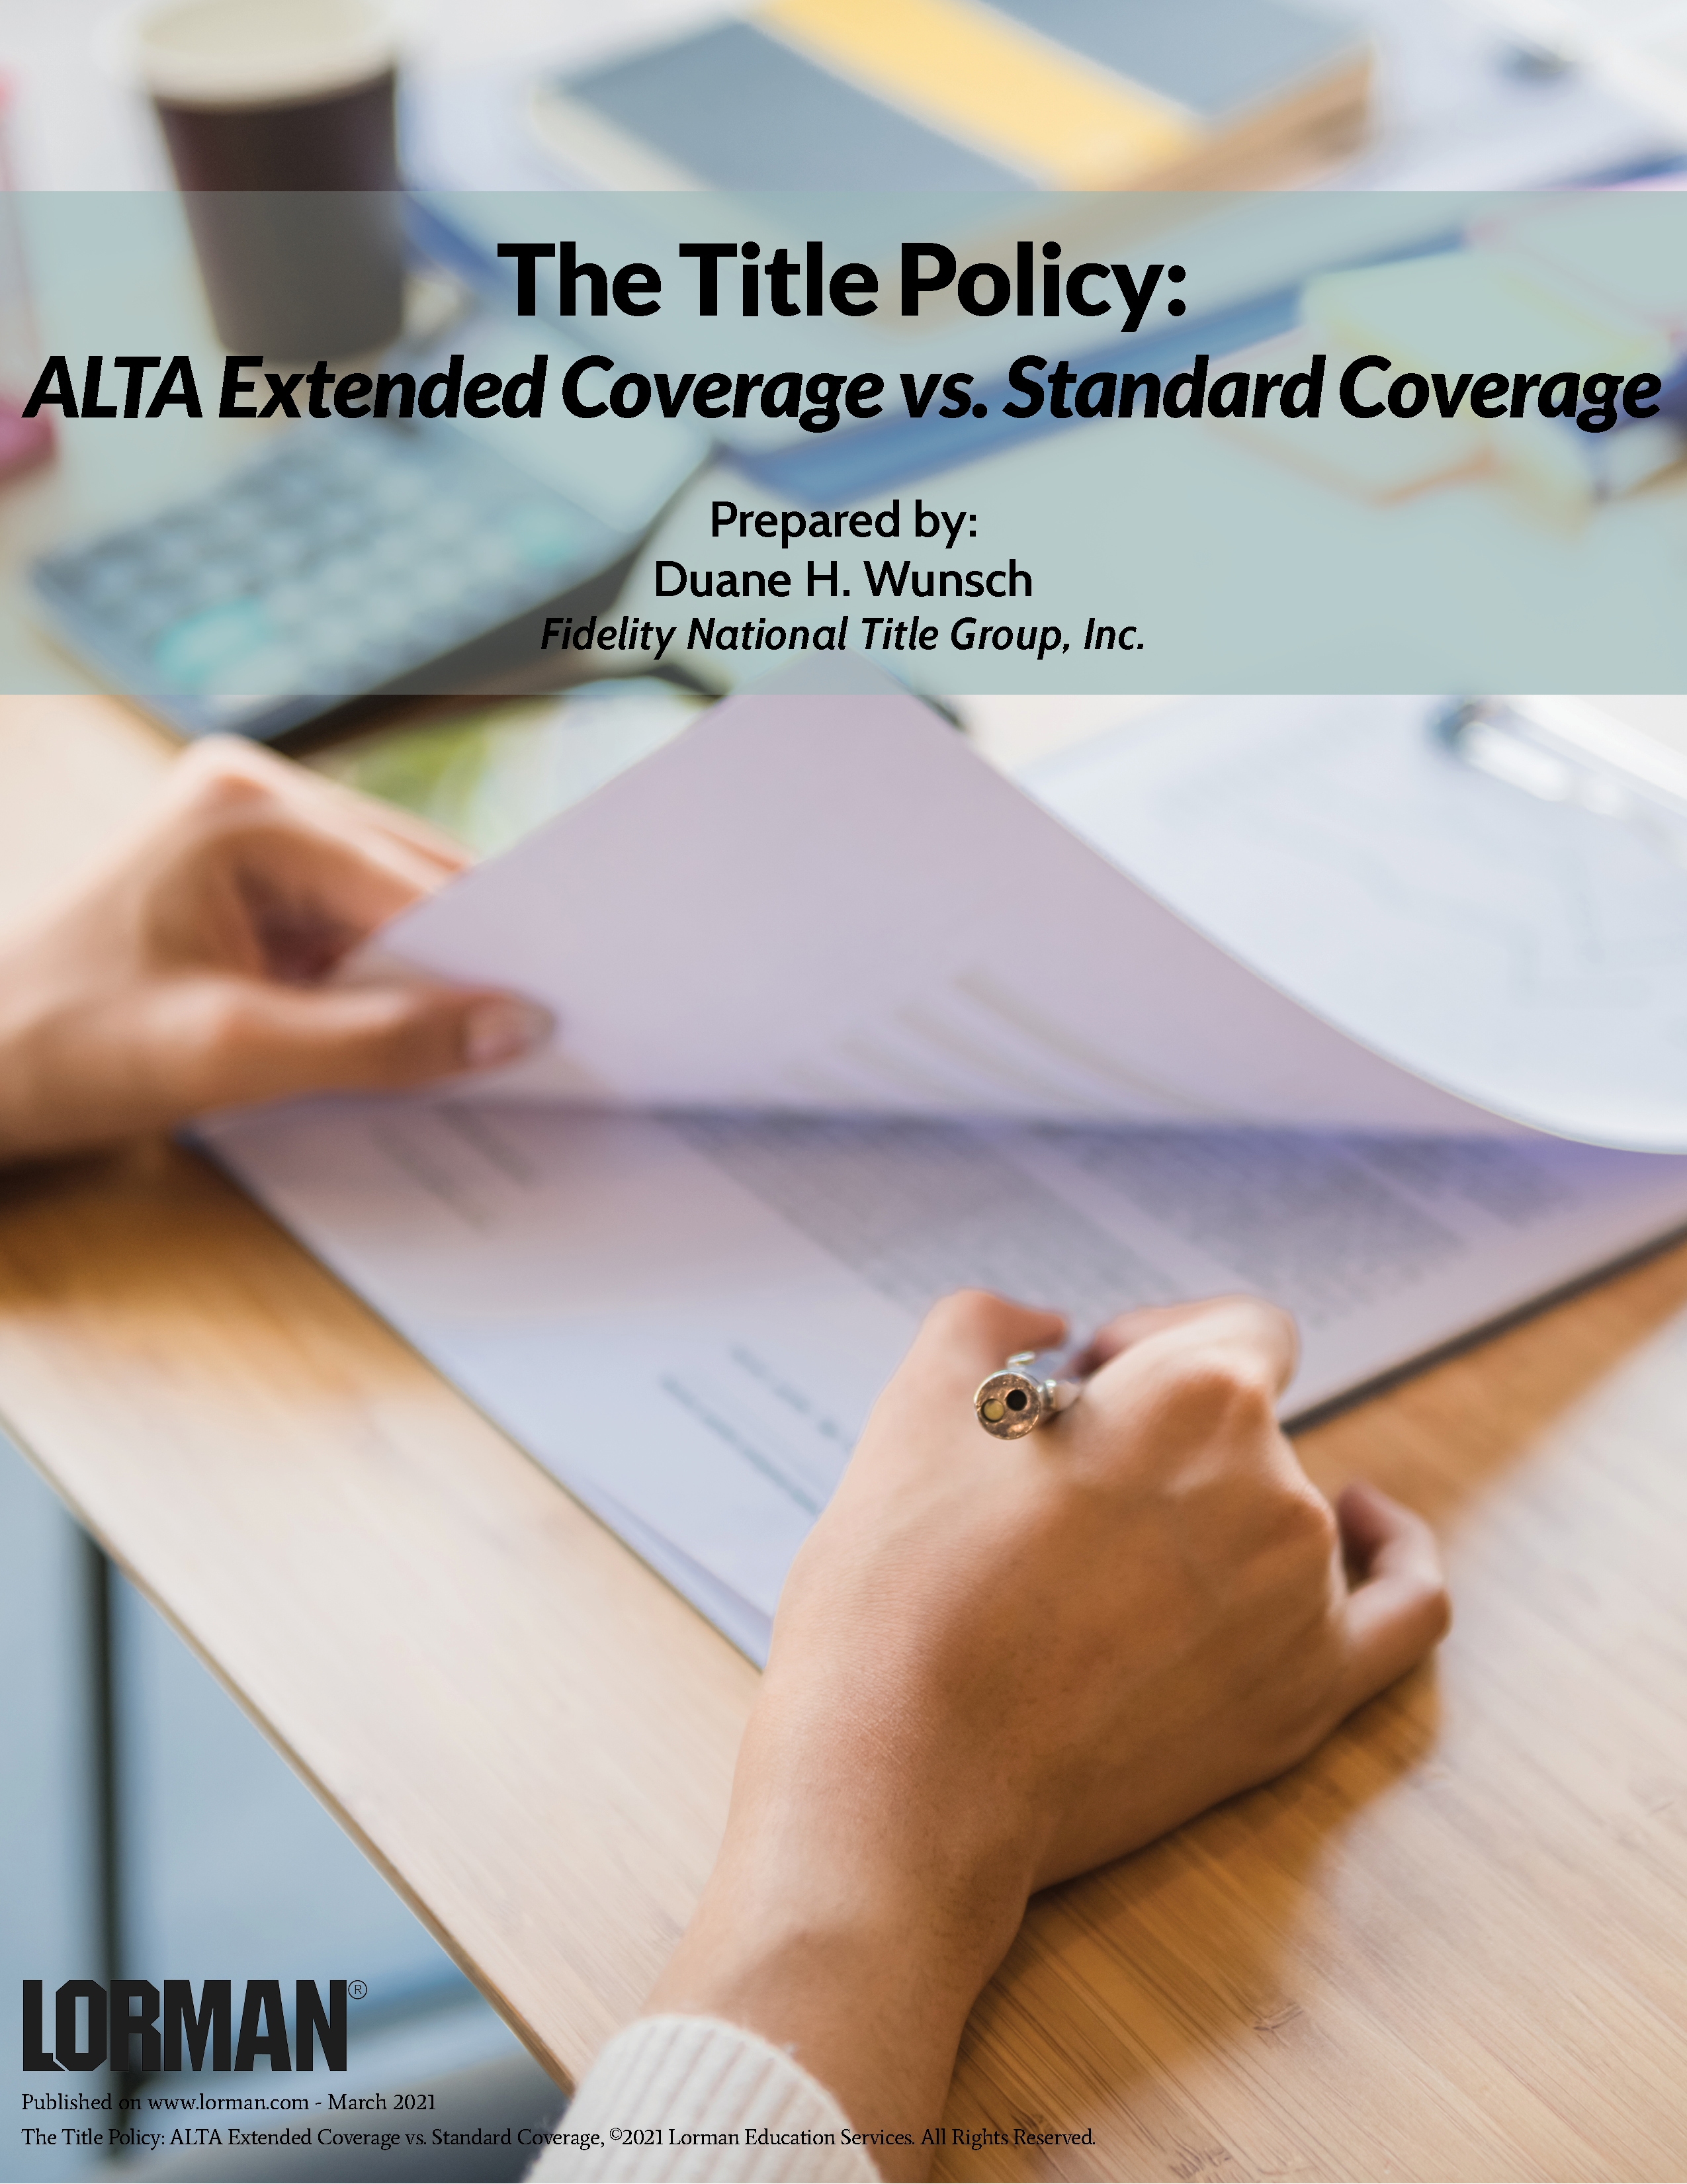 The Title Policy: ALTA Extended Coverage vs. Standard Coverage